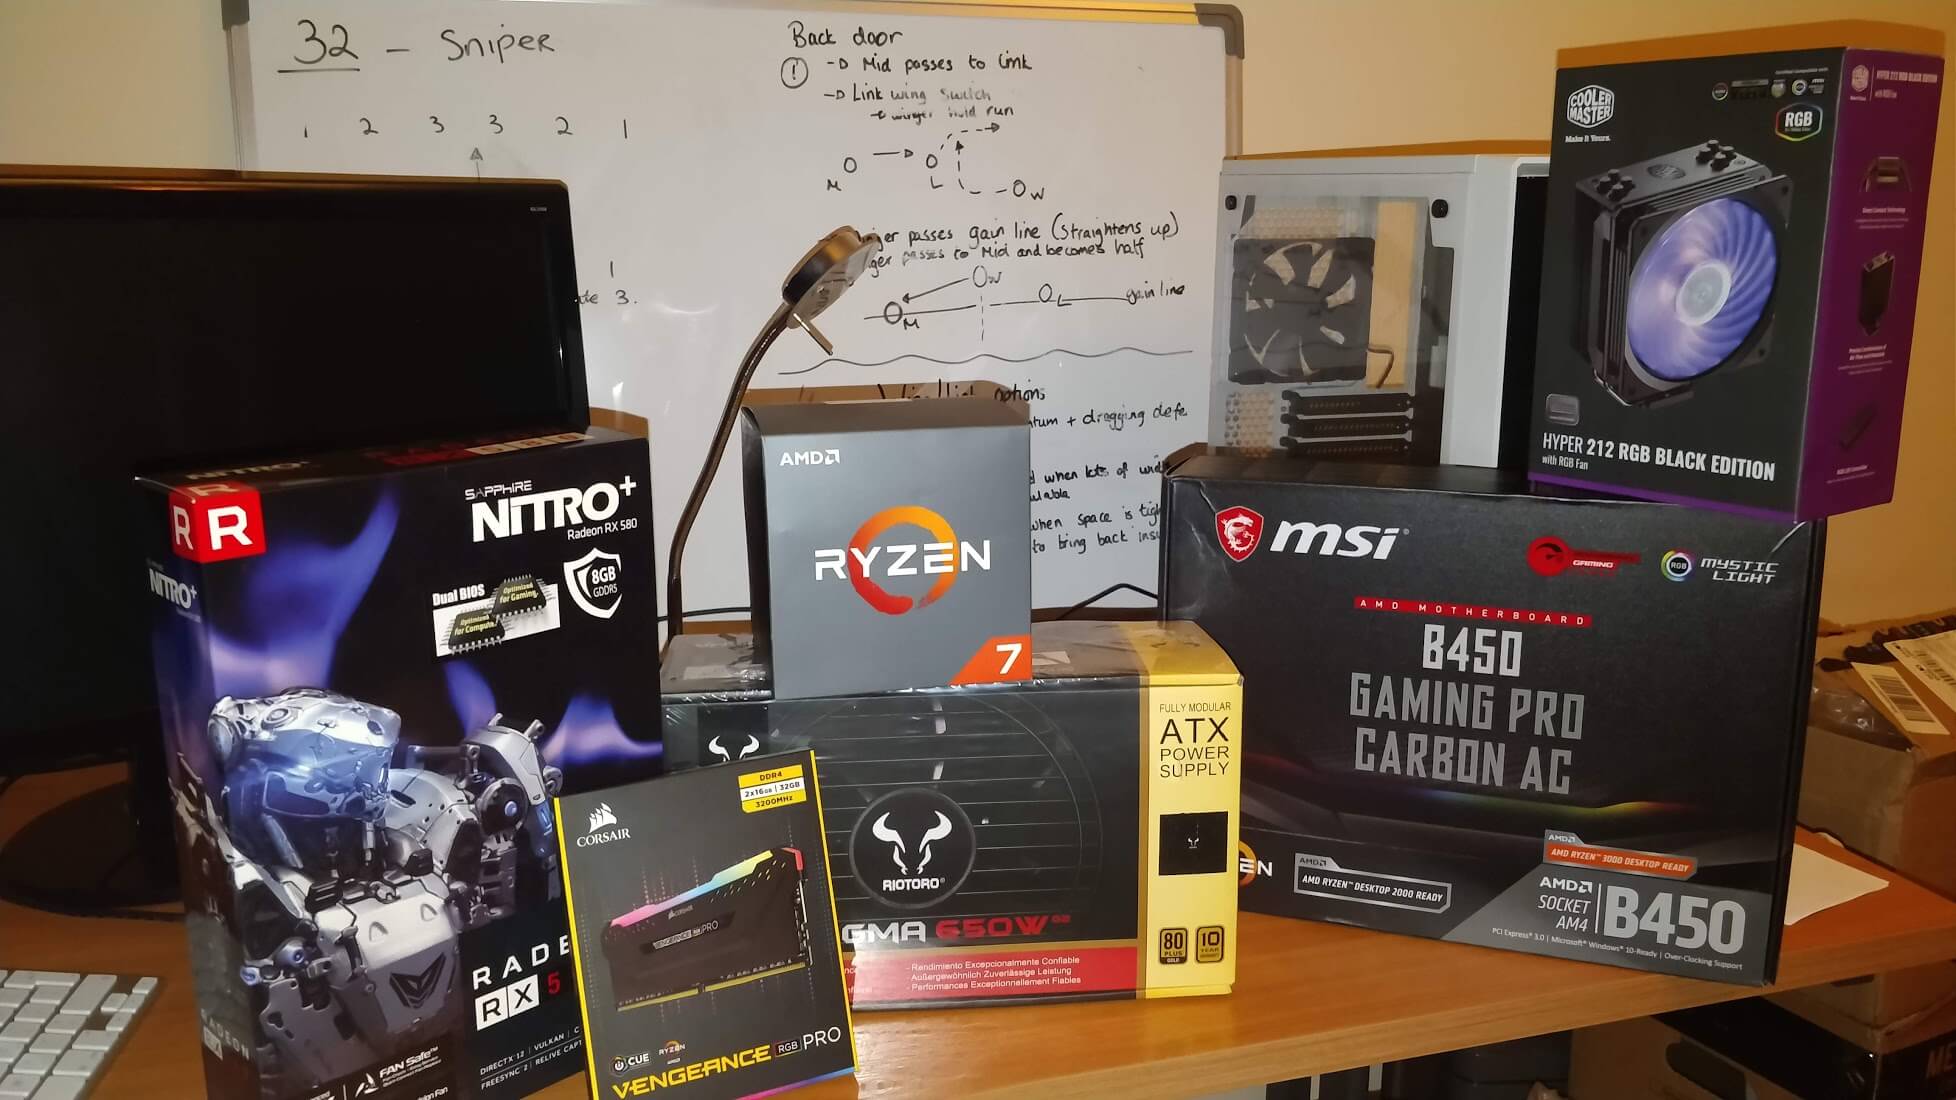 The parts for my custom PC build focused on software development with a sprinkle of gaming.